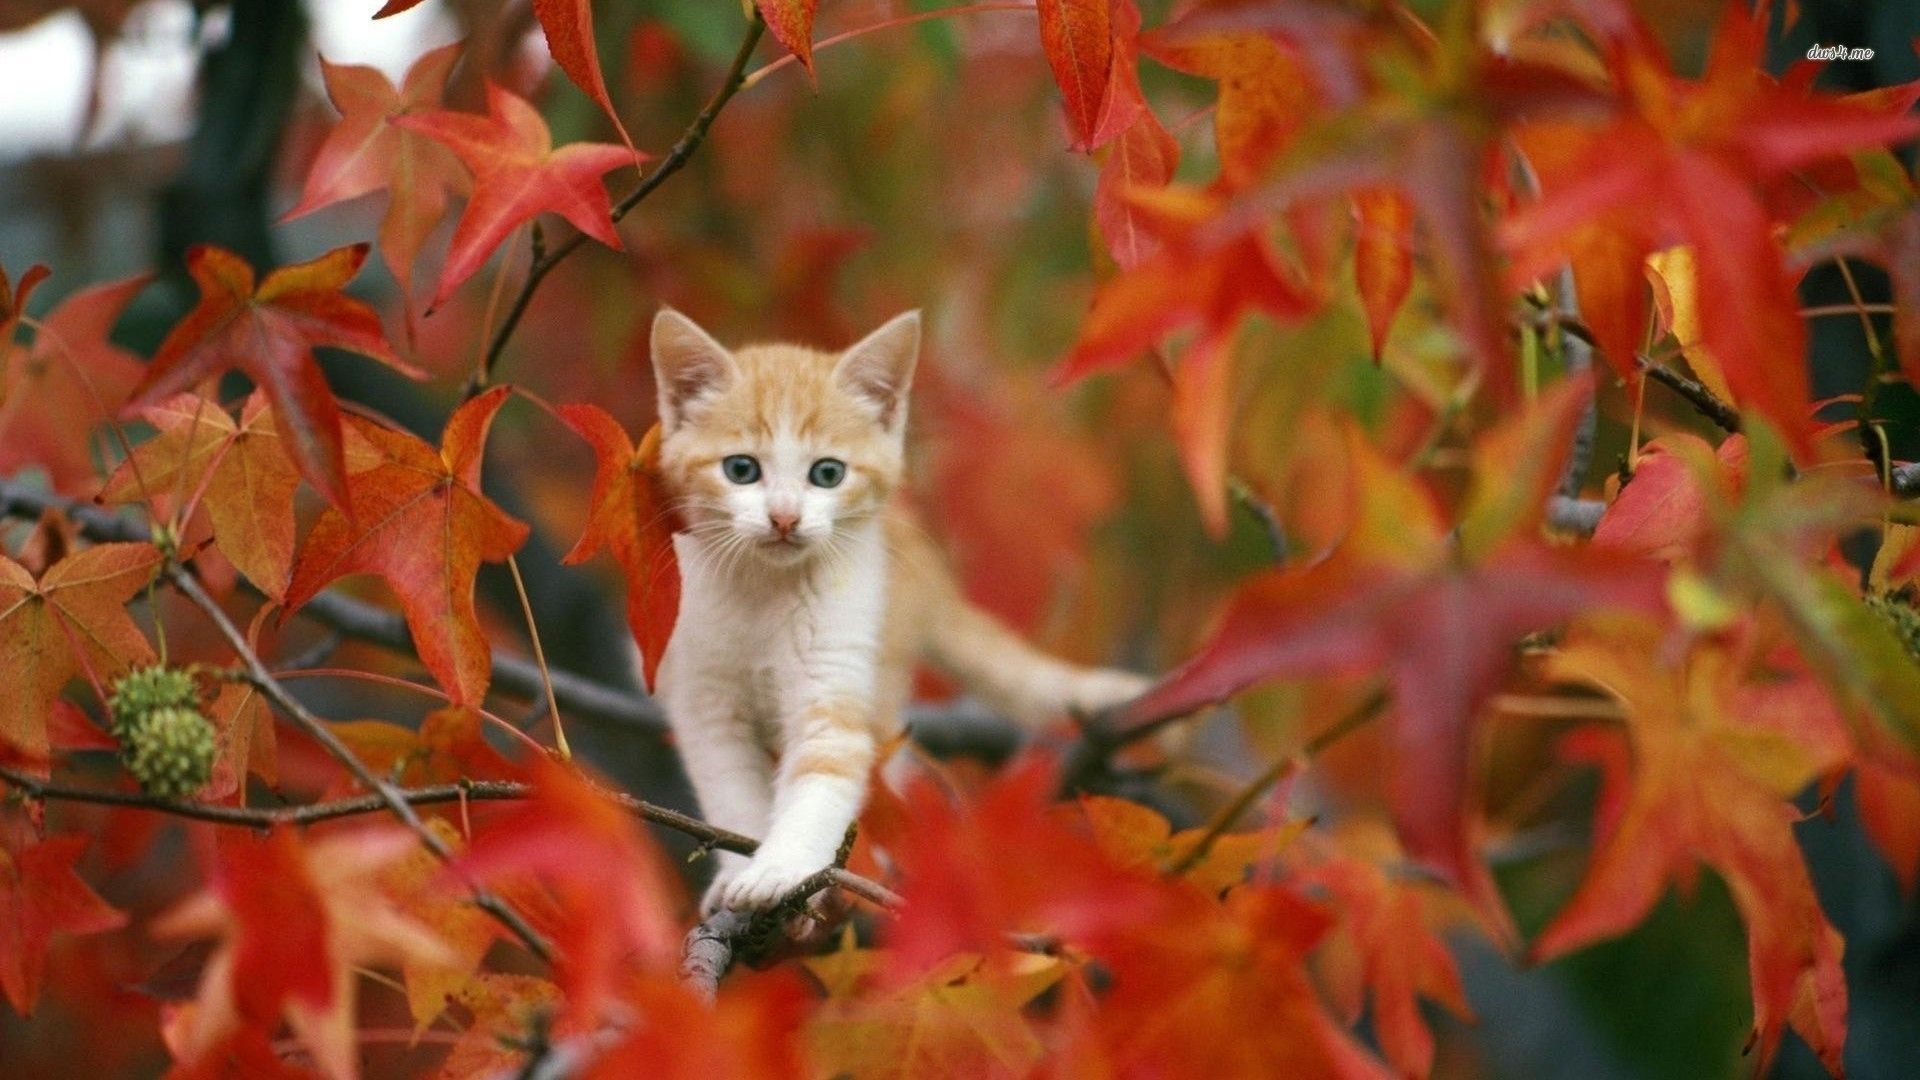 Wallpaper  1920x1080 px animals cats fall leaves woolly hat 1920x1080   wallpaperUp  750831  HD Wallpapers  WallHere